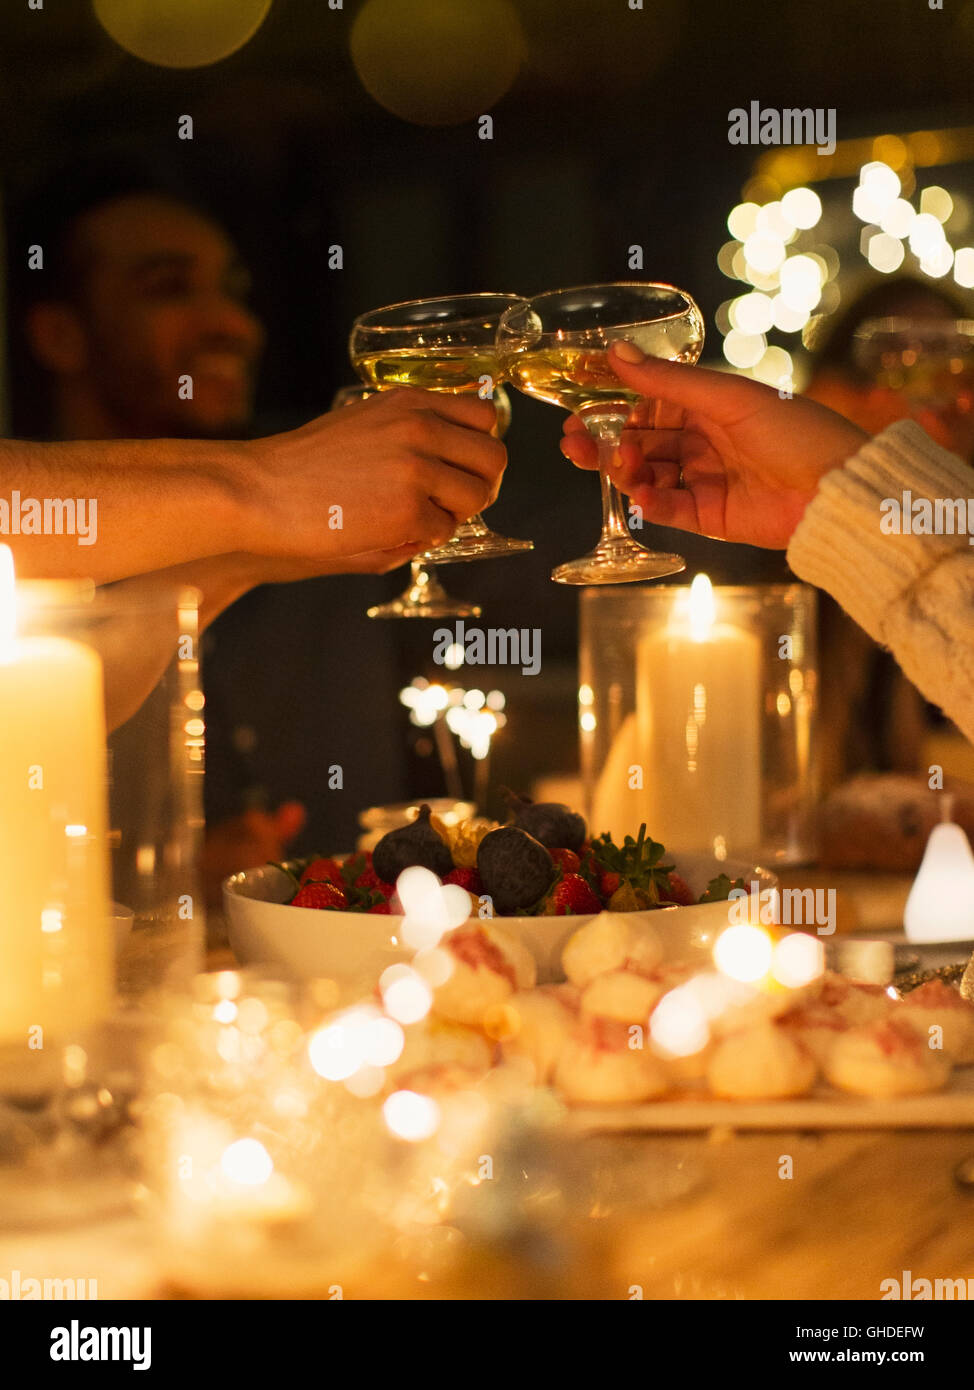 Friends toasting champagne glasses over table at candlelight Christmas dinner Stock Photo